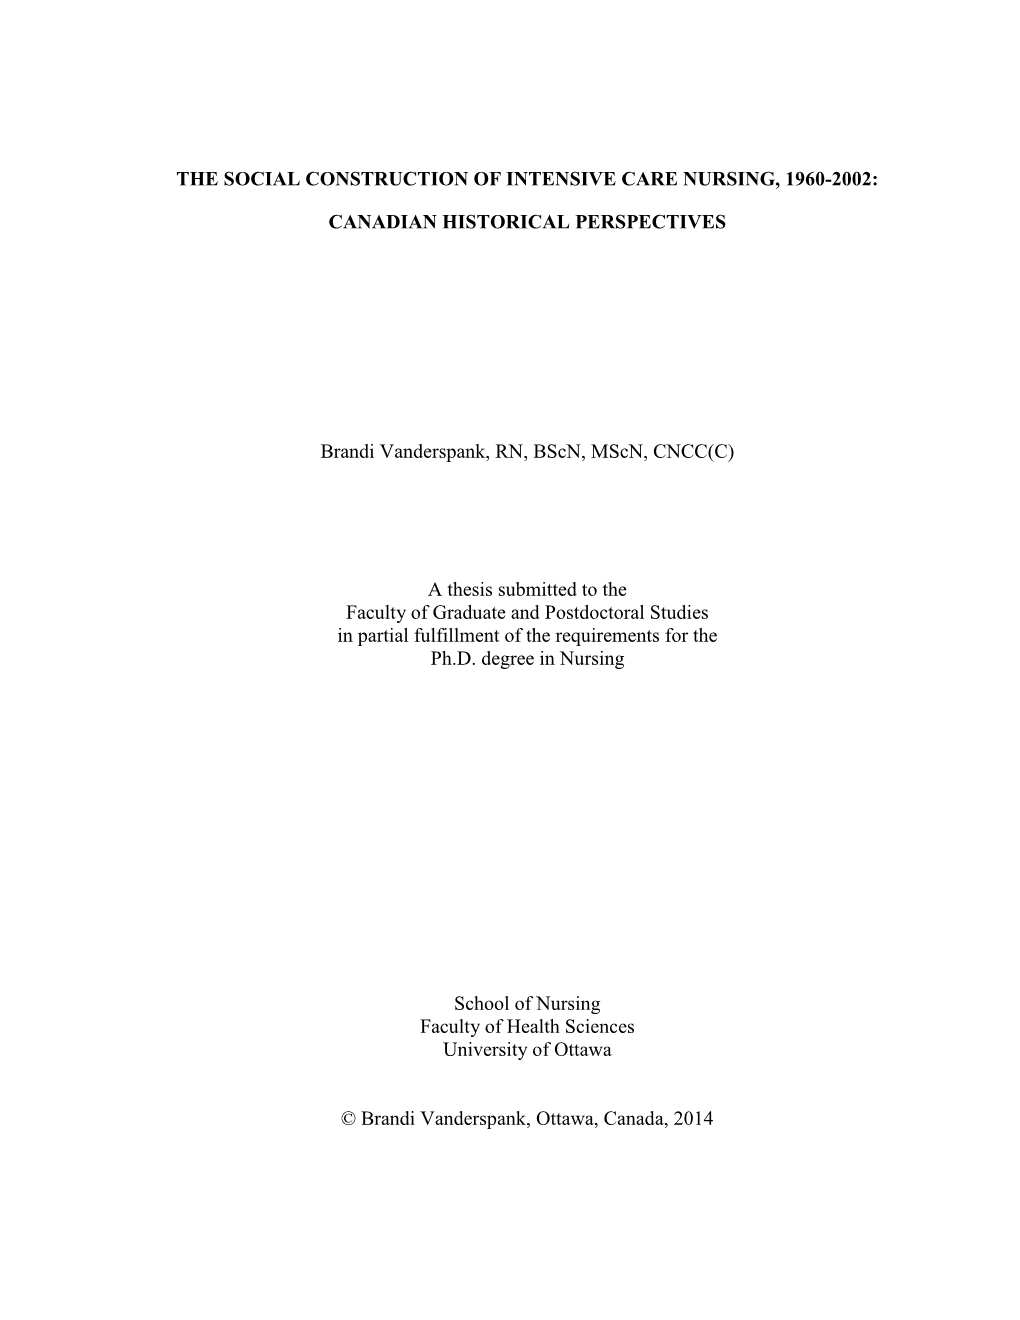 The Social Construction of Intensive Care Nursing, 1960-2002